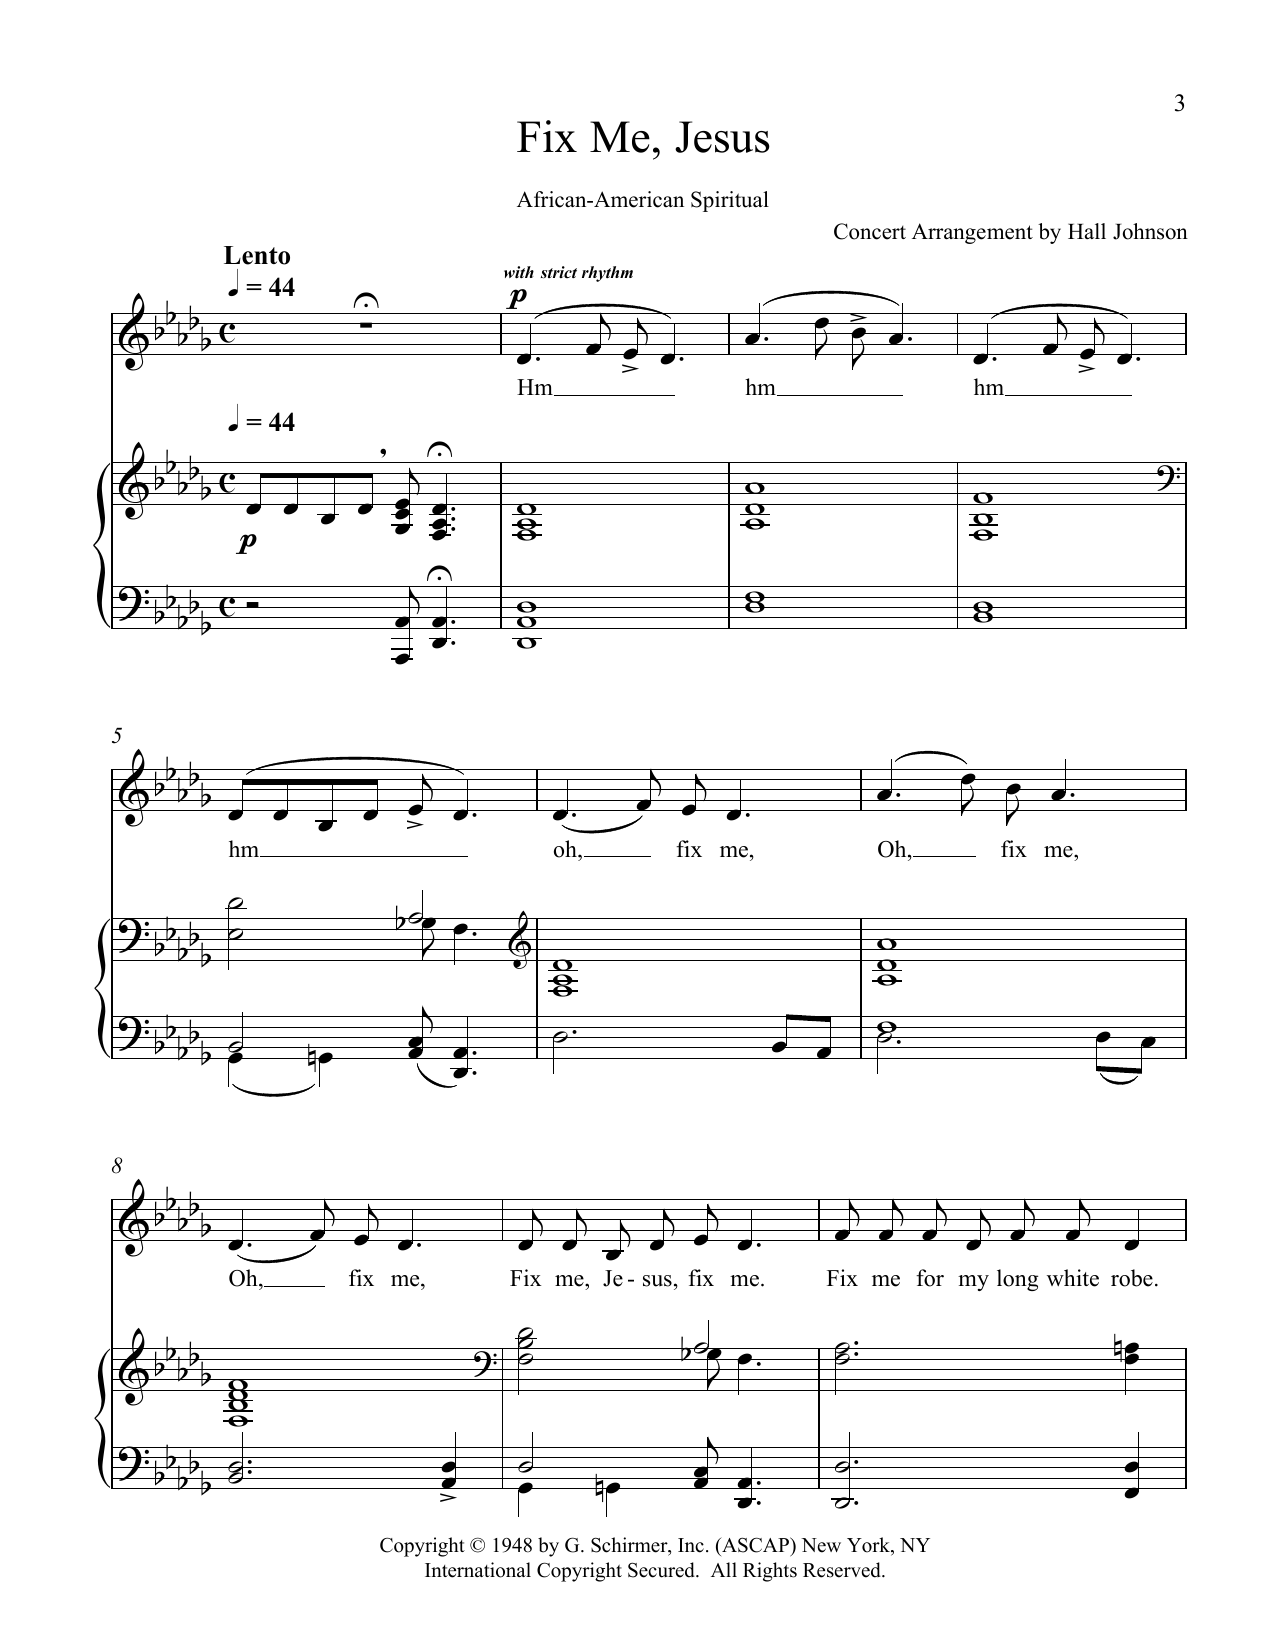 Hall Johnson Fix Me, Jesus (D-flat) sheet music notes and chords. Download Printable PDF.